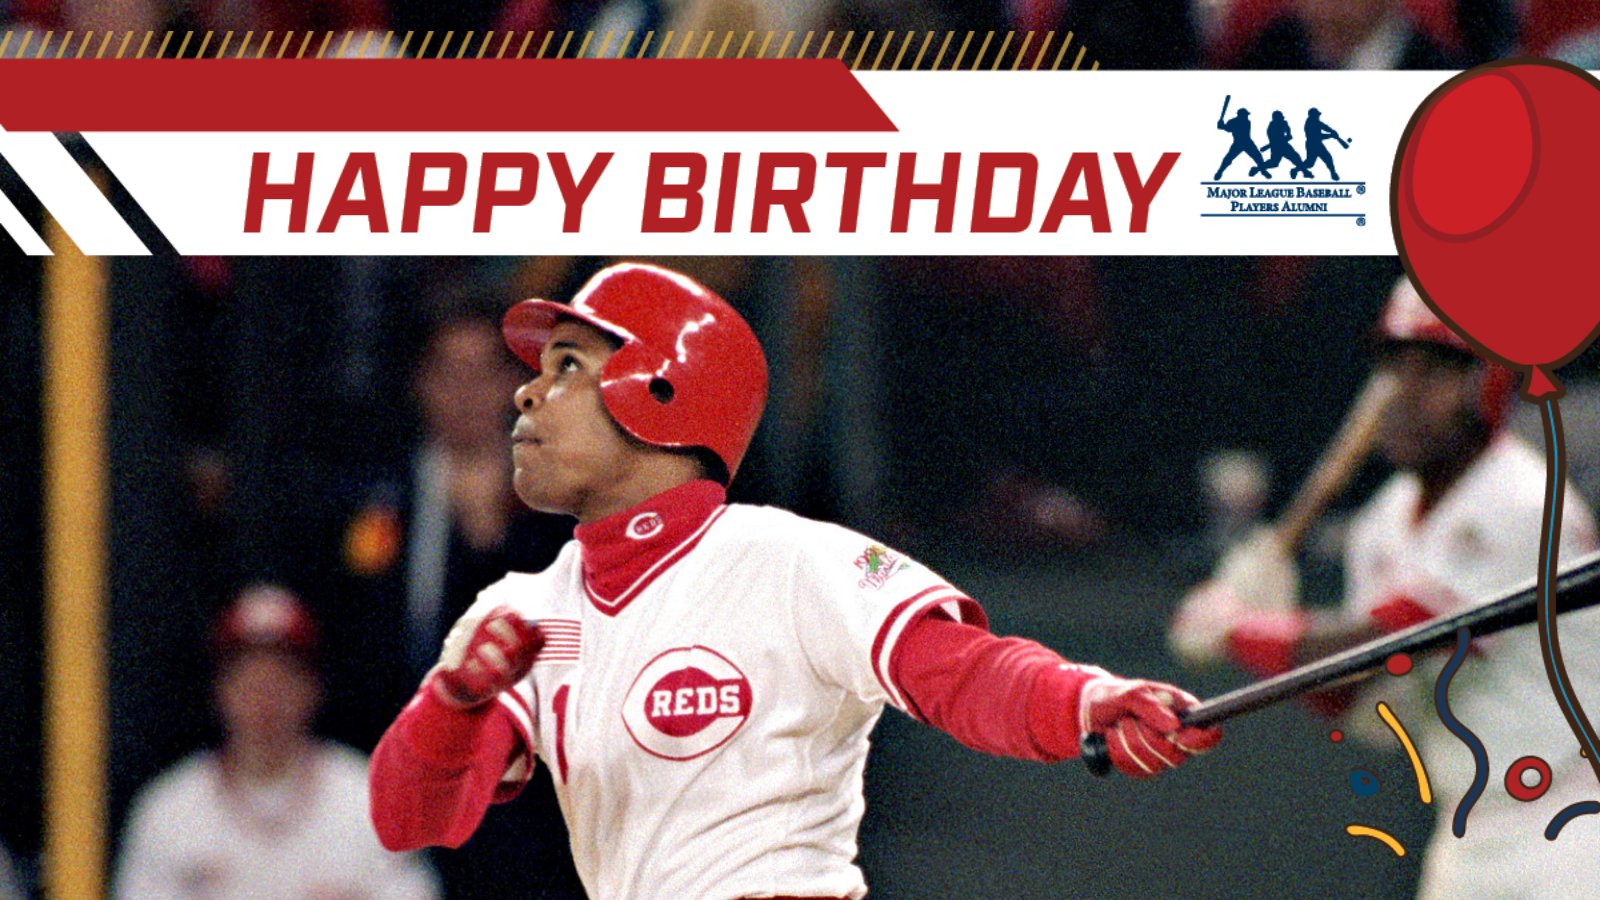 Happy Birthday to Vice President and royalty, Barry Larkin! 